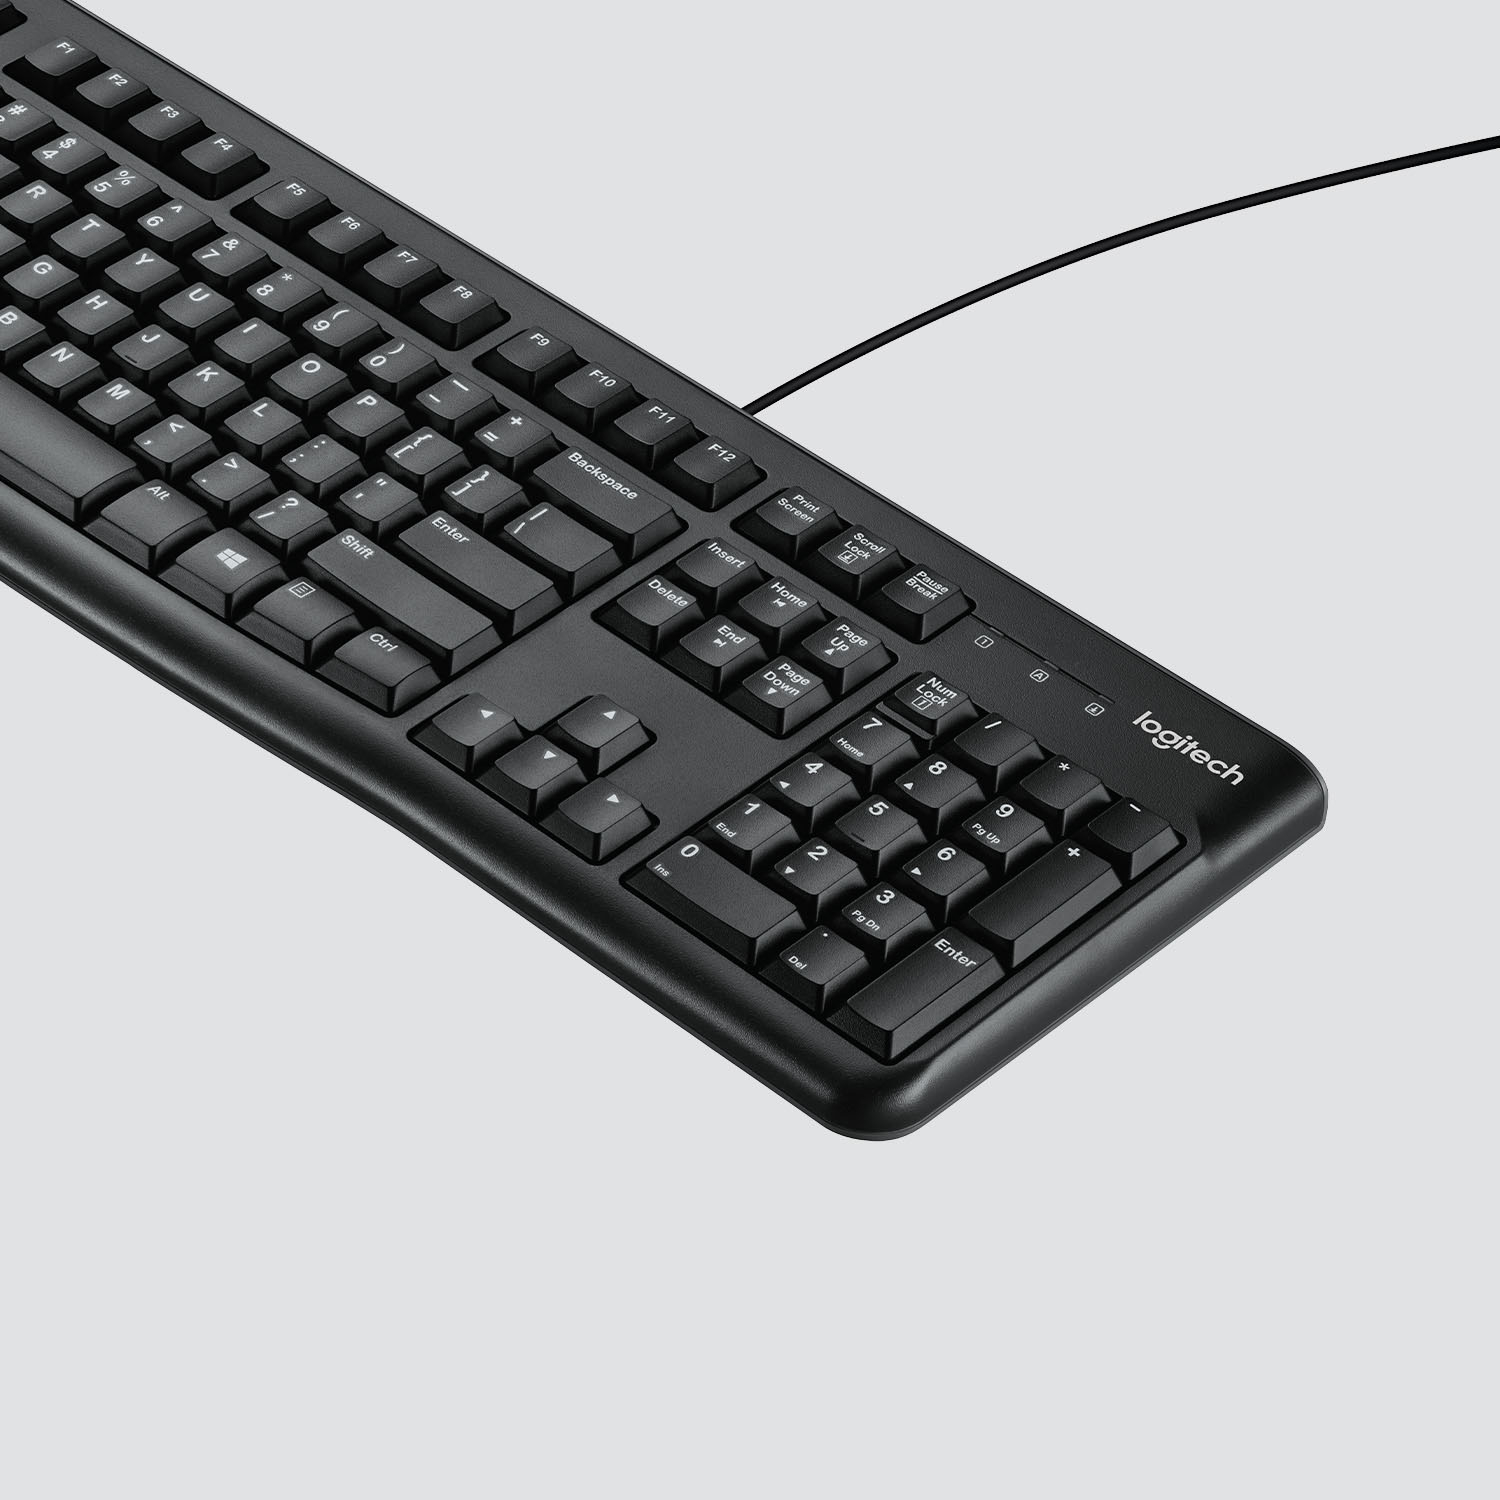 Logitech - K120  Full-size Wired Membrane Keyboard for PC with Spill-Resistant Design - Black